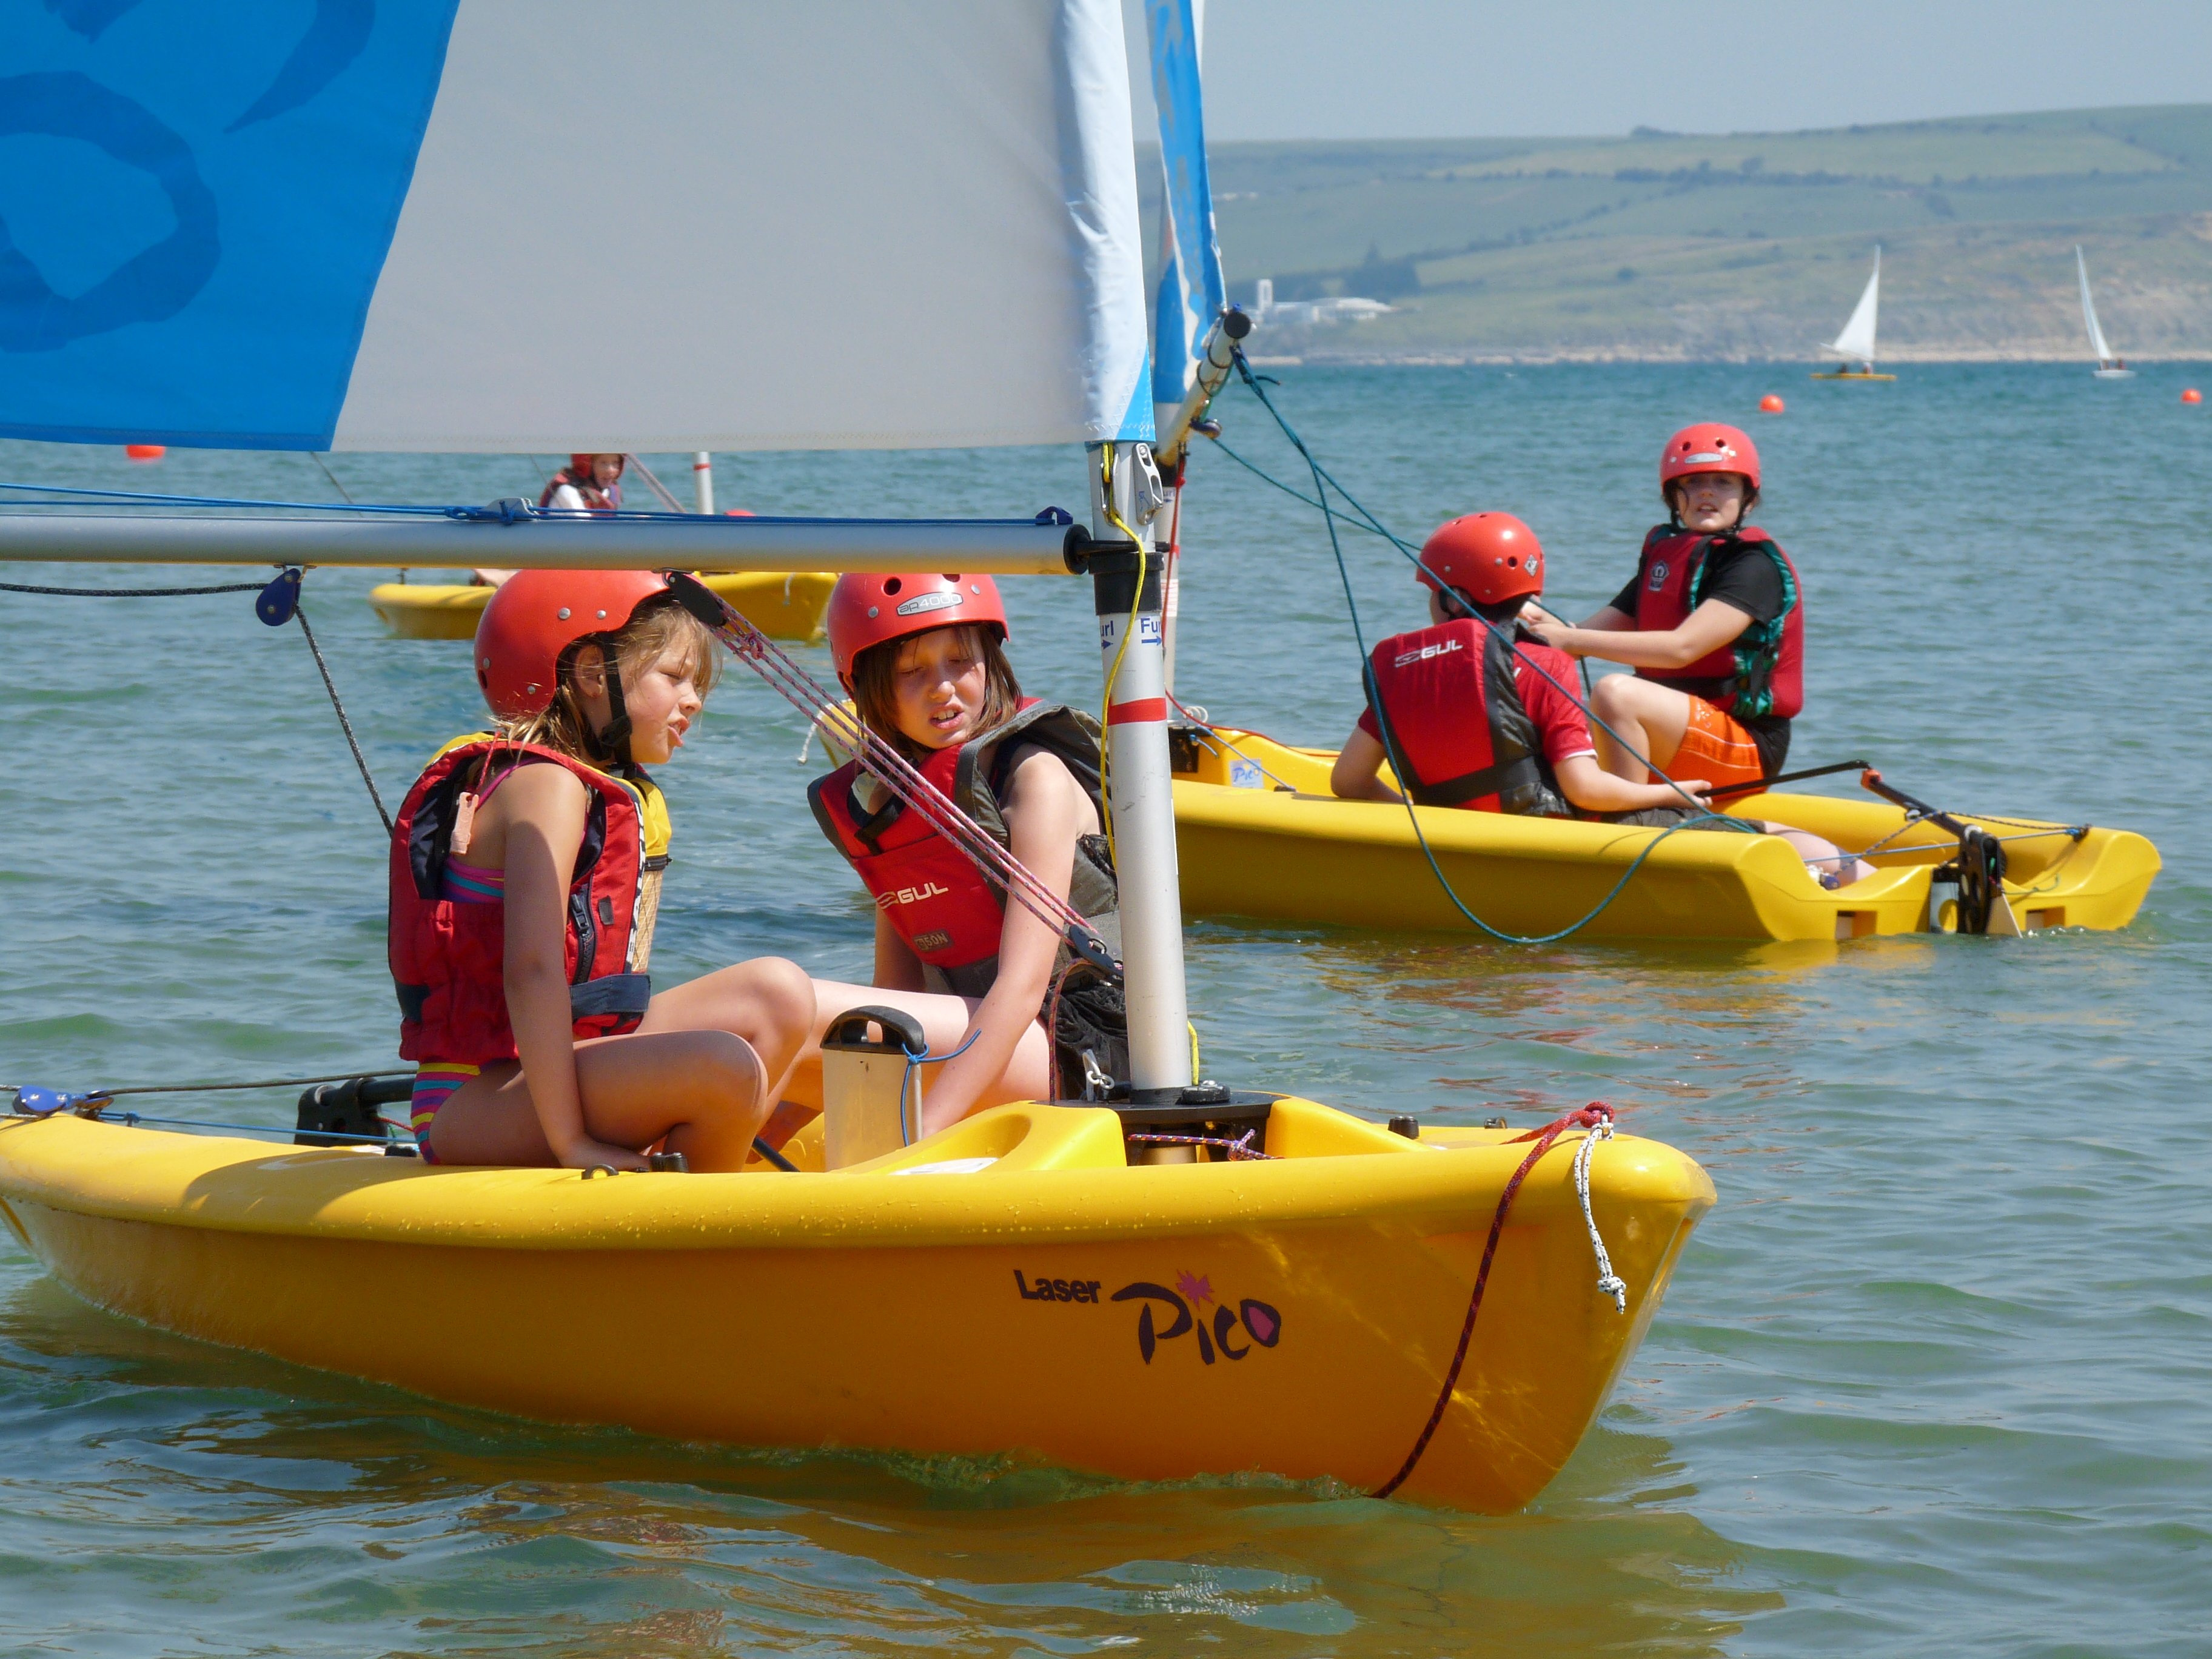 Sail for a fiver gives young people a half day sailing session